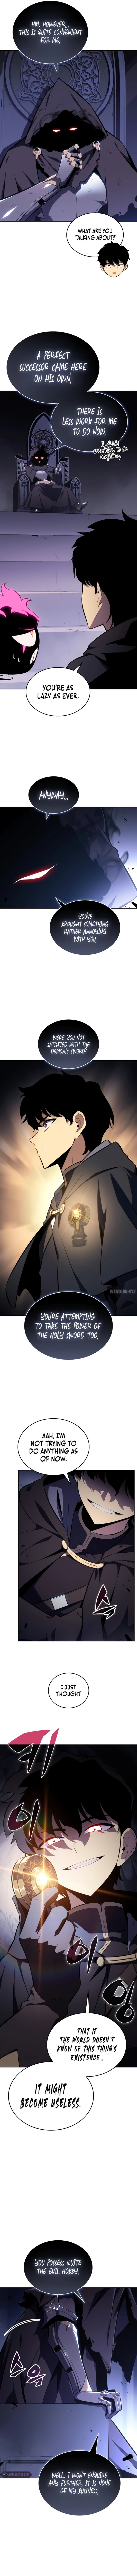 The Regressed Son of a Duke is an Assassin - Chapter 19 Page 6